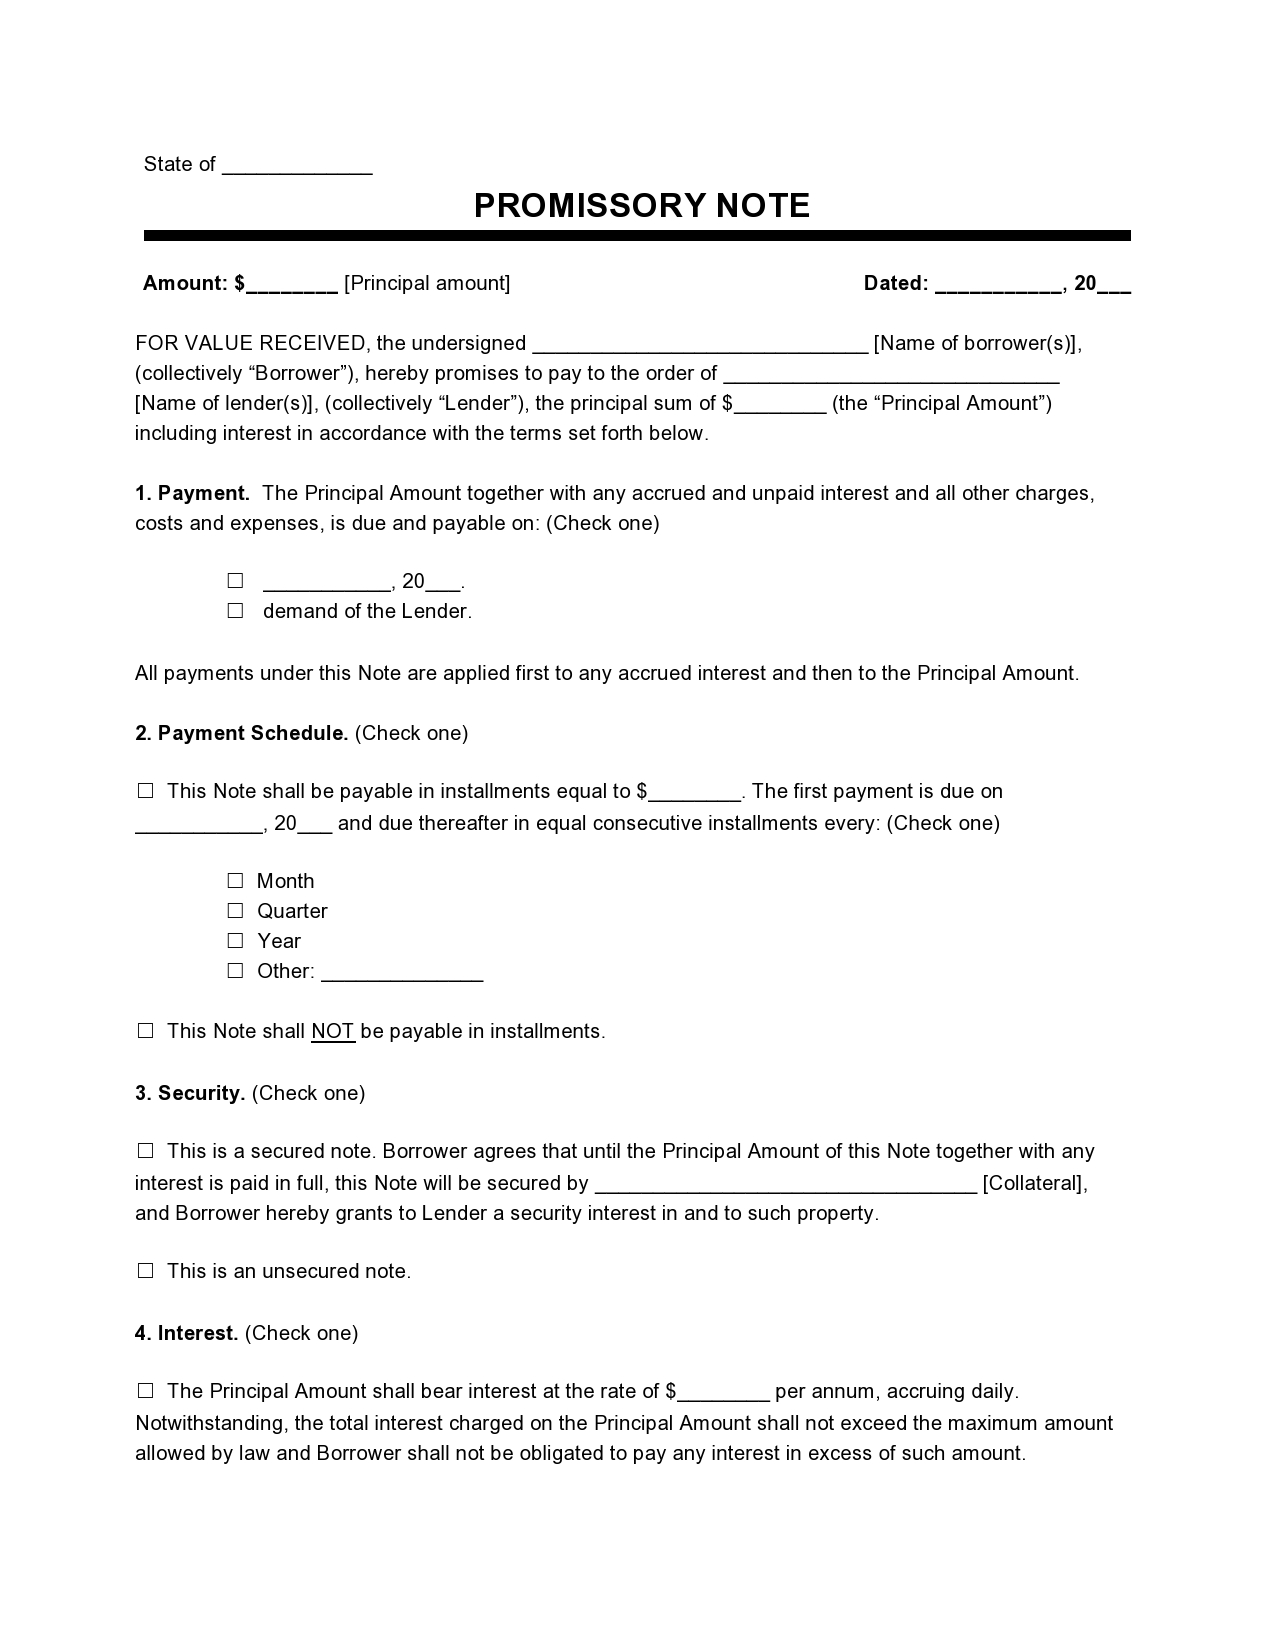 Free promissory note template 08